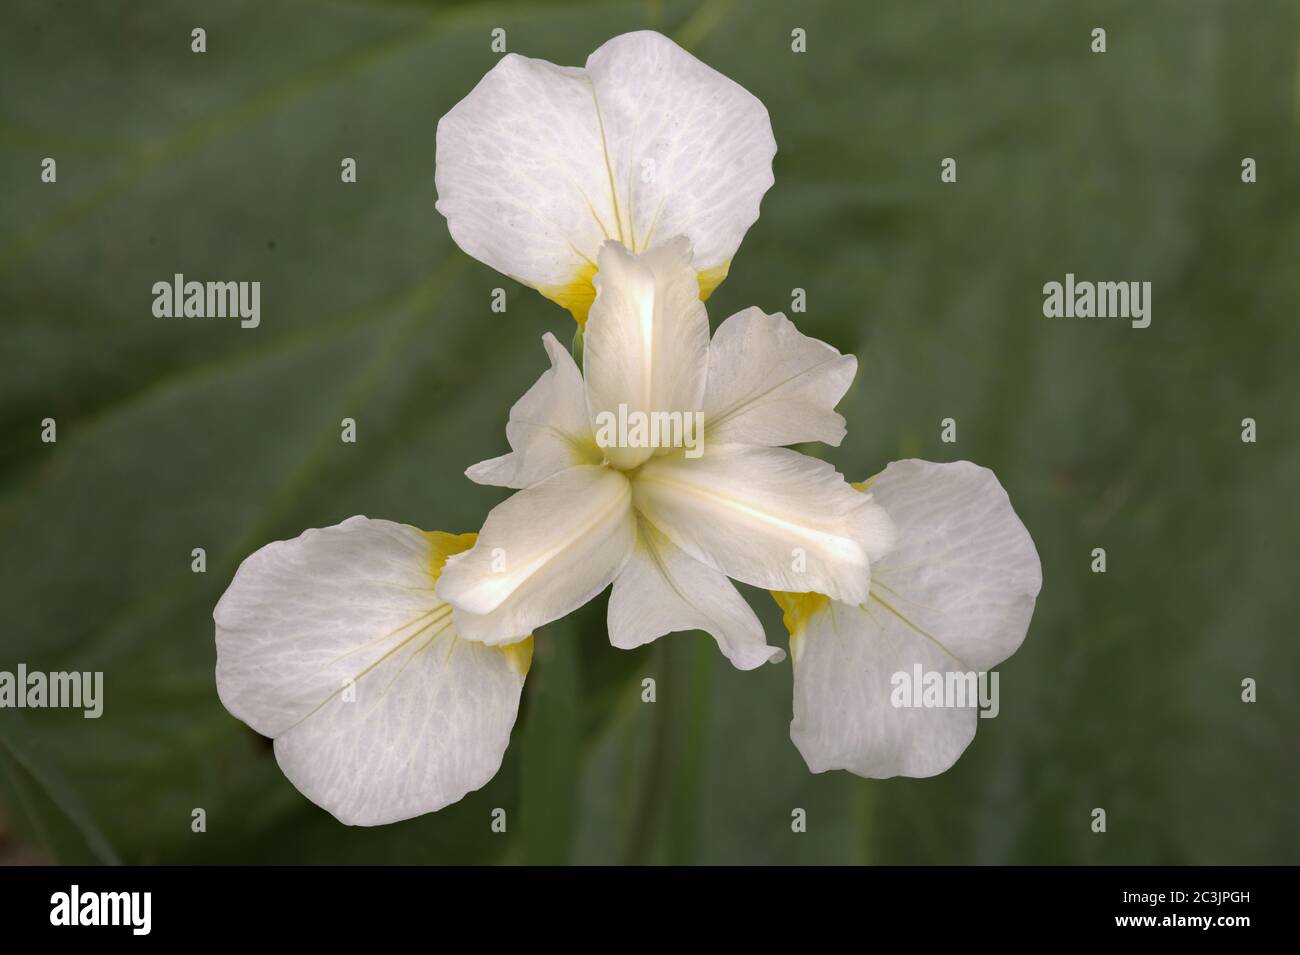 Beauty in nature. Closeup image of spring-flowering Siberian Iris (Iris sibirica) with delicate white petals extending outward from center of flower. Stock Photo